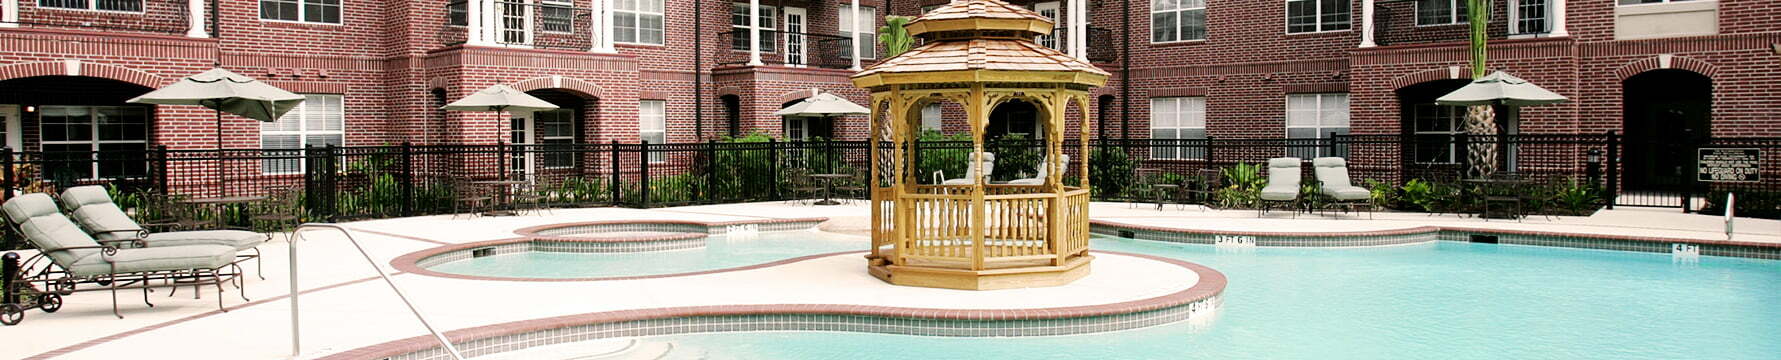 The pool at The Buckingham a senior living community in Houston